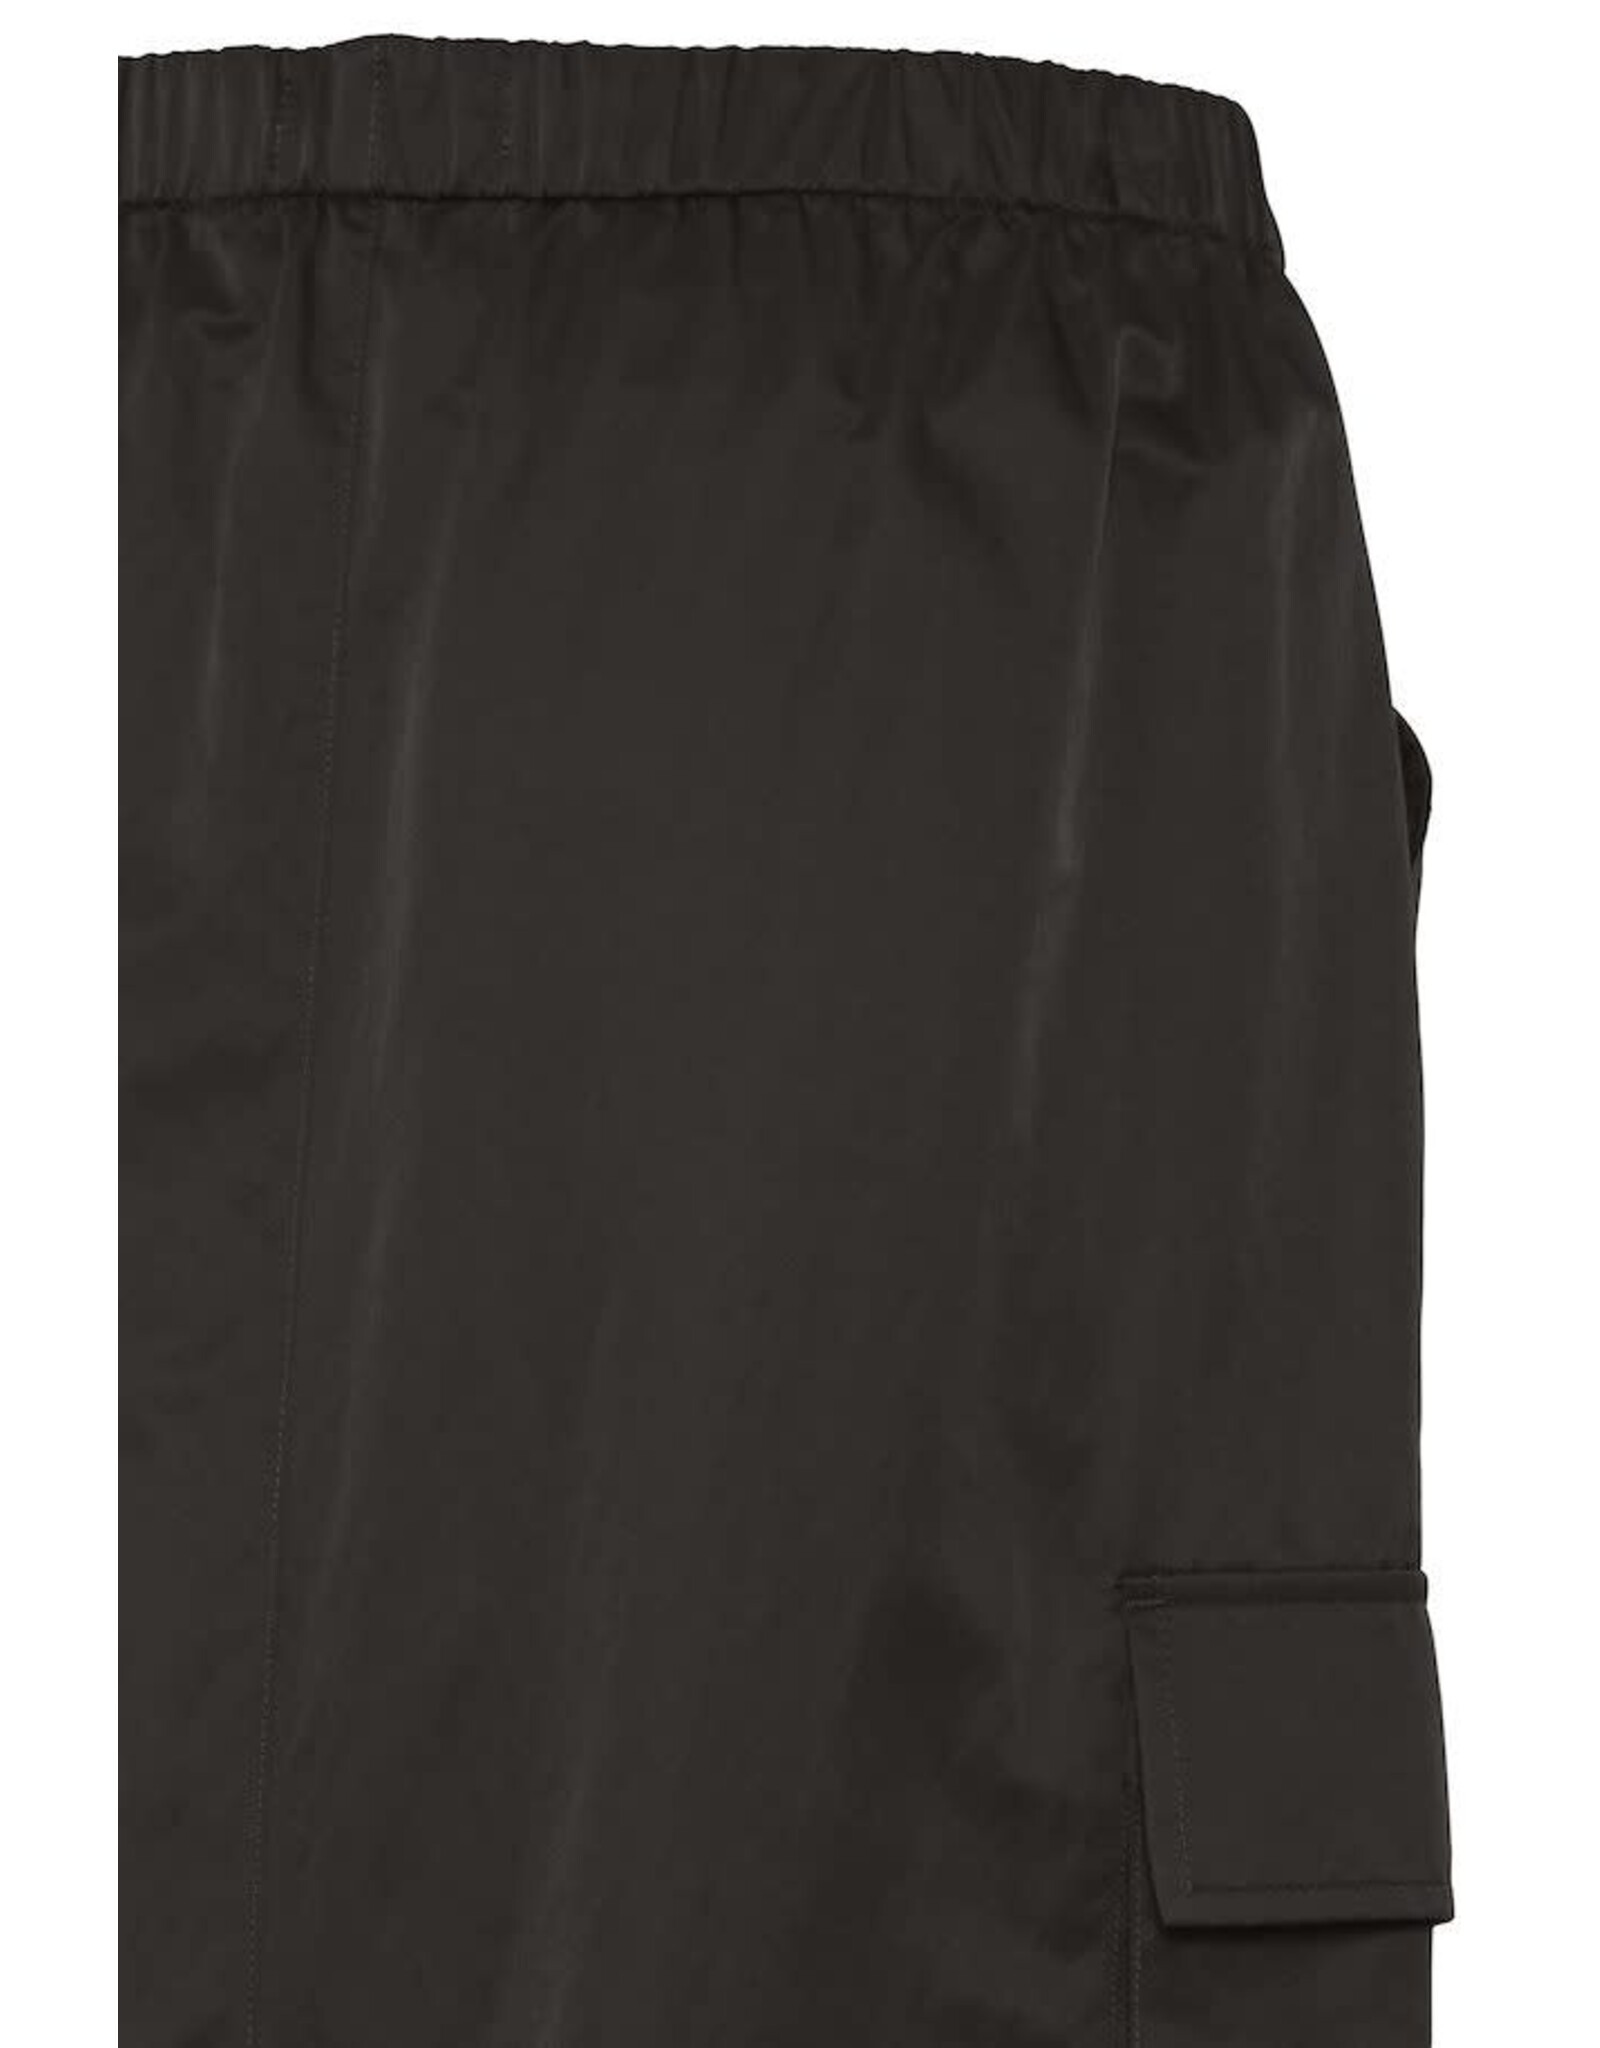 b.young b.young - Datine cargo skirt (black)